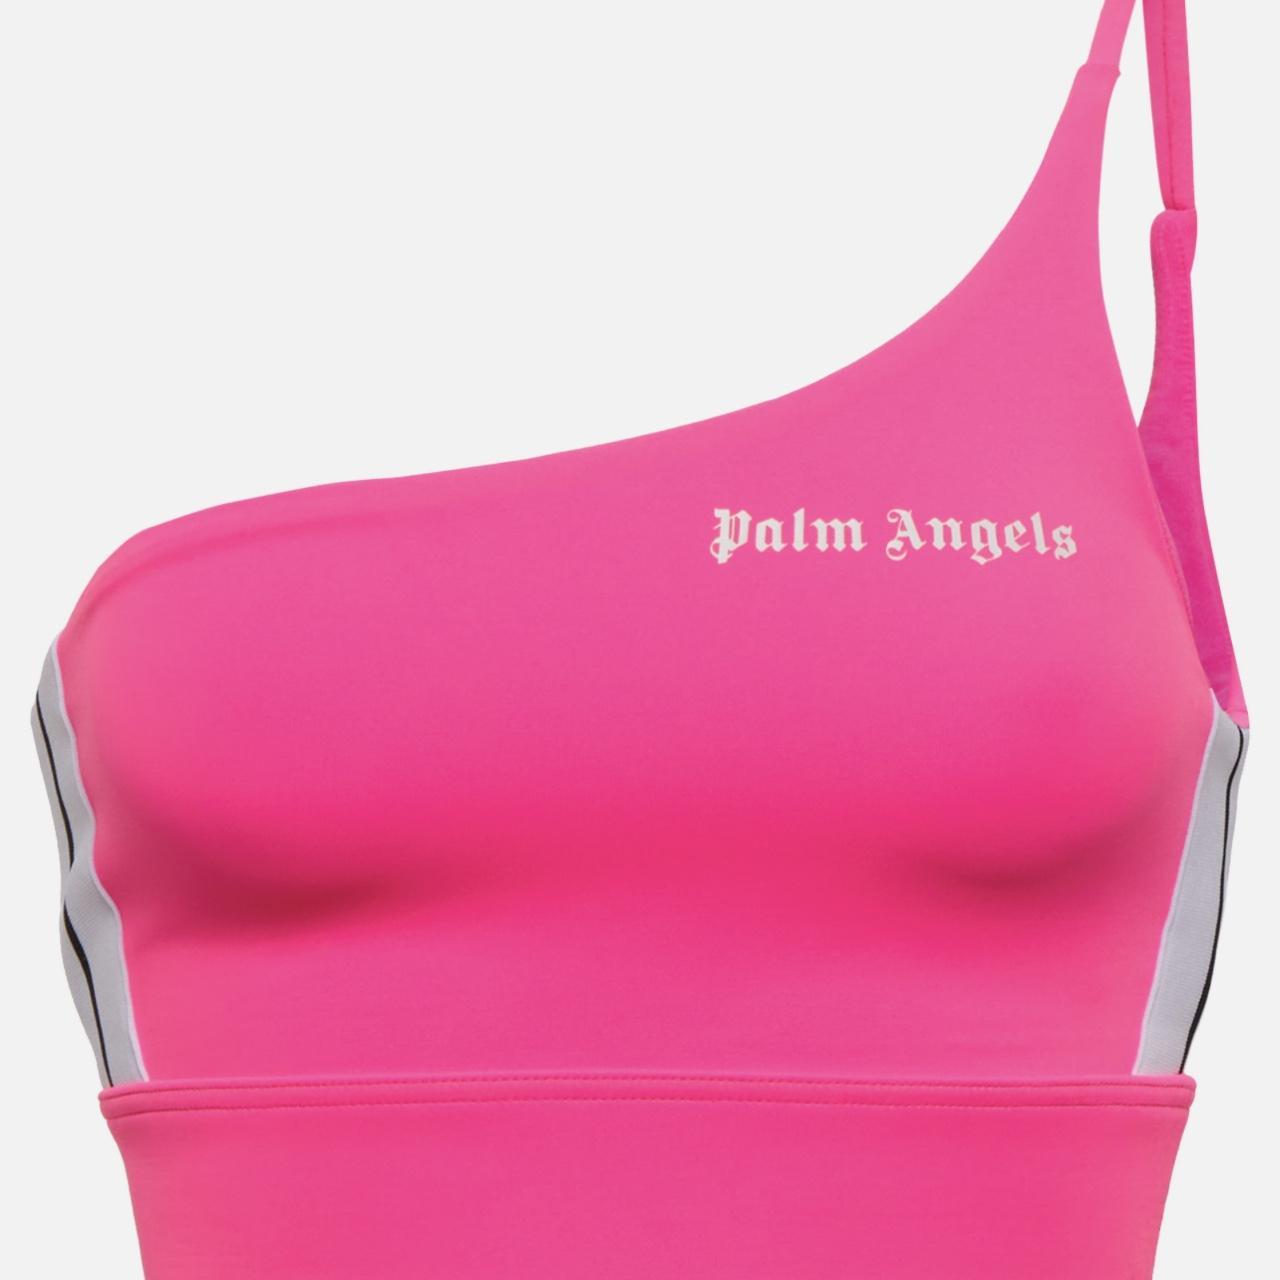 Palm Angels Women's Pink and White Crop-top